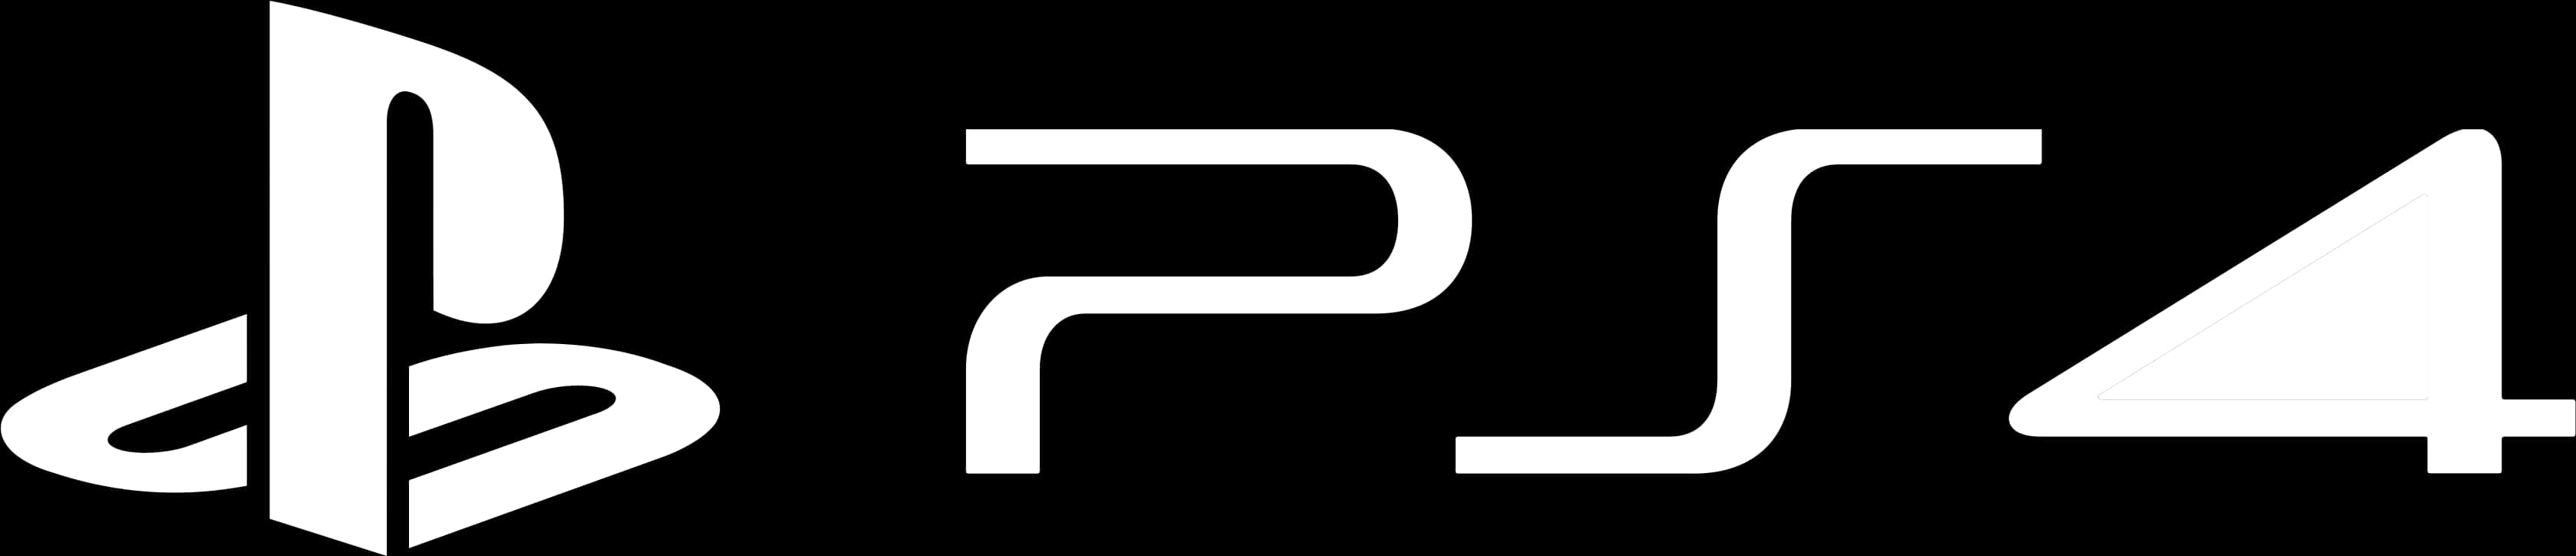 Play Station P S4 Logo Blackand White PNG image